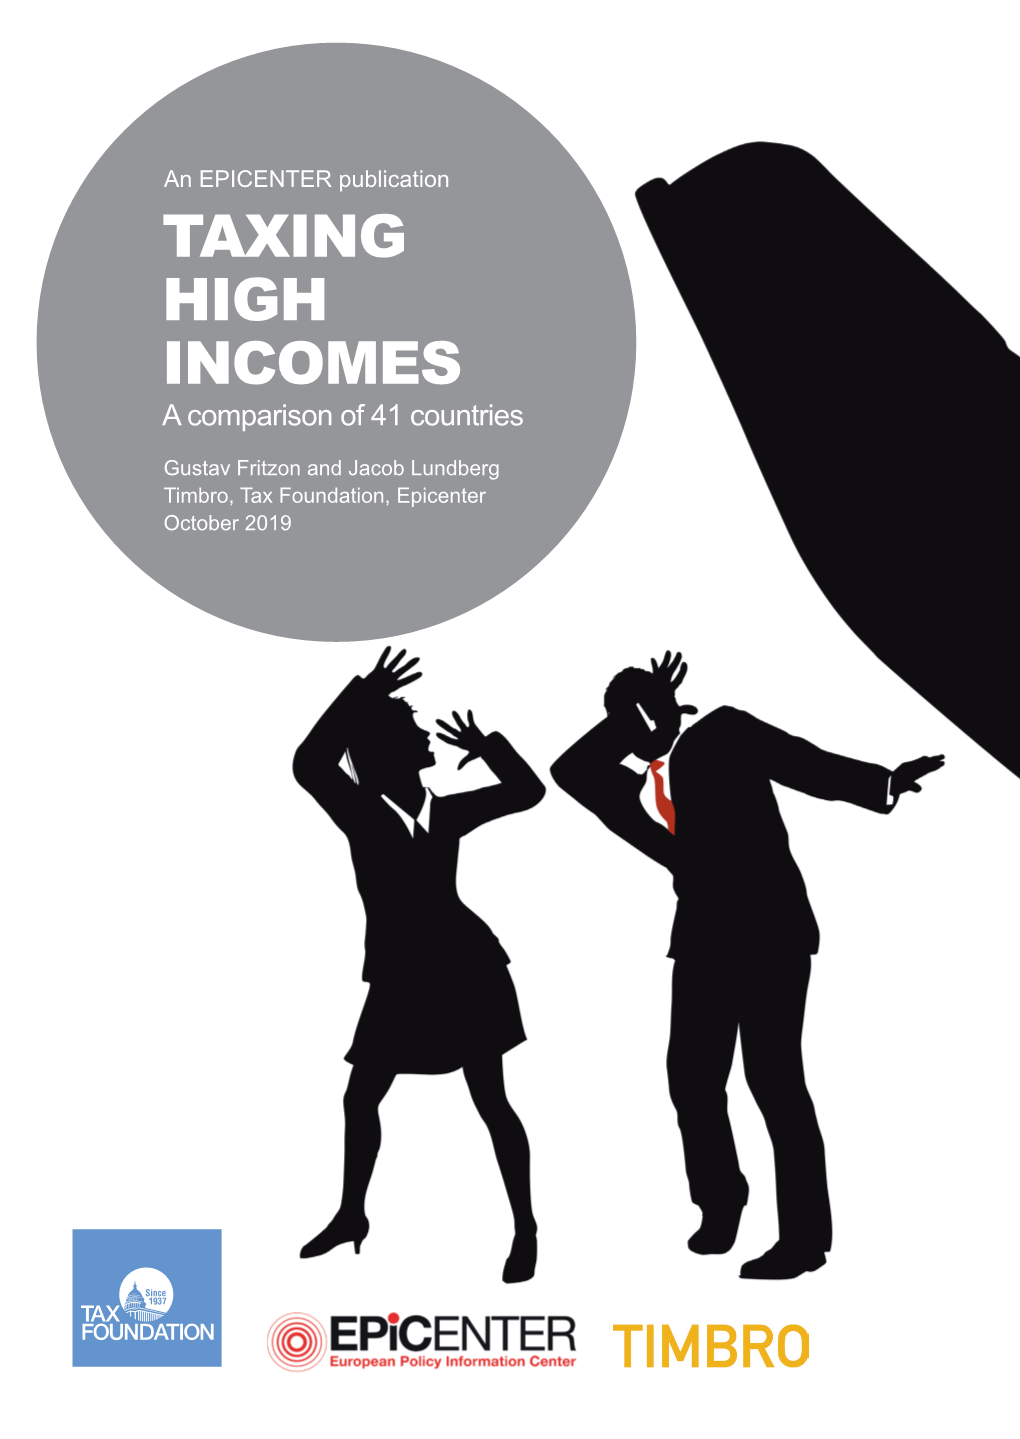 TAXING HIGH INCOMES a Comparison of 41 Countries